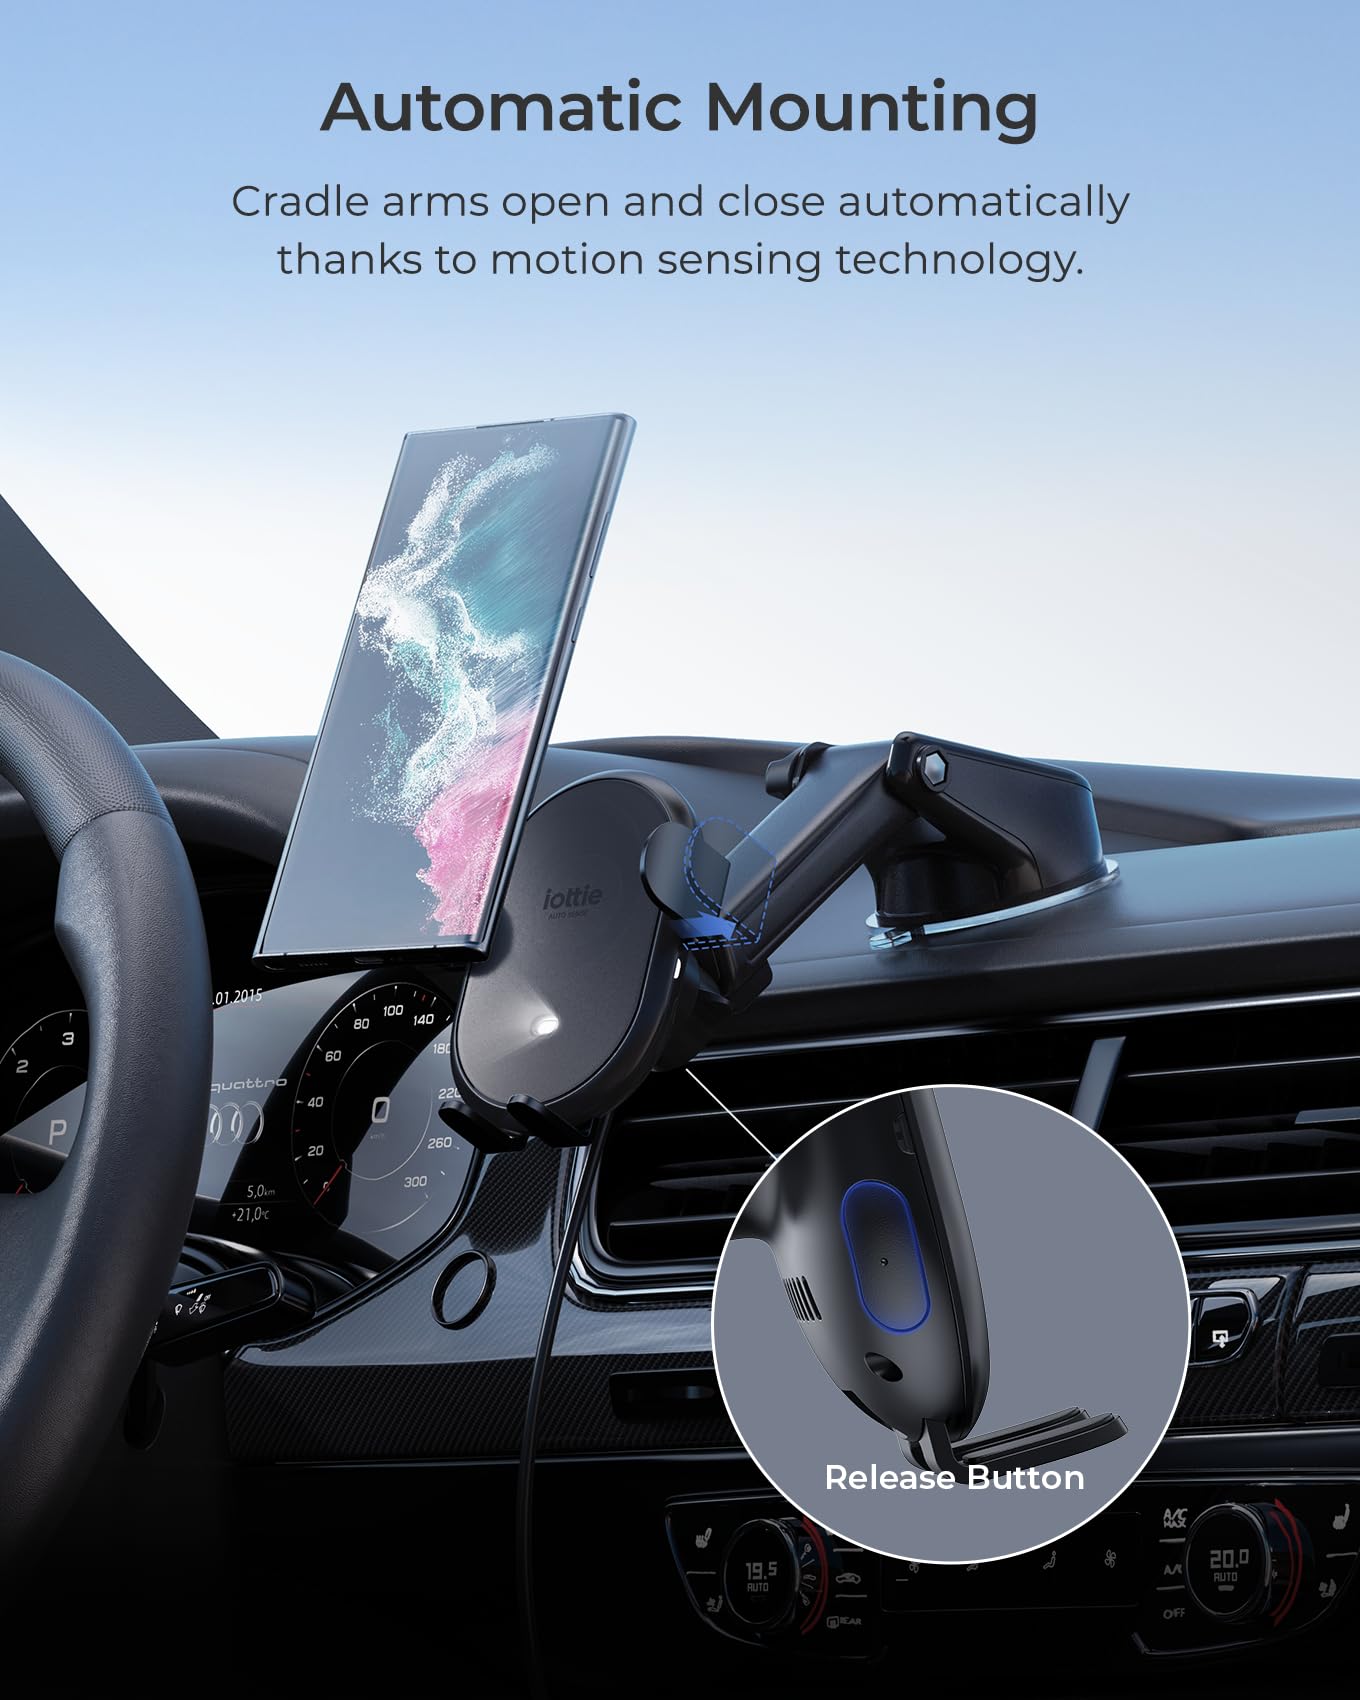 iOttie Auto Sense 2 Dash & Windshield Car Phone Holder with Qi Wireless Charging - Auto Clamping Phone Mount & Charger for Google Pixel, iPhone, Galaxy, Huawei, LG. Power Adapter Not Included.